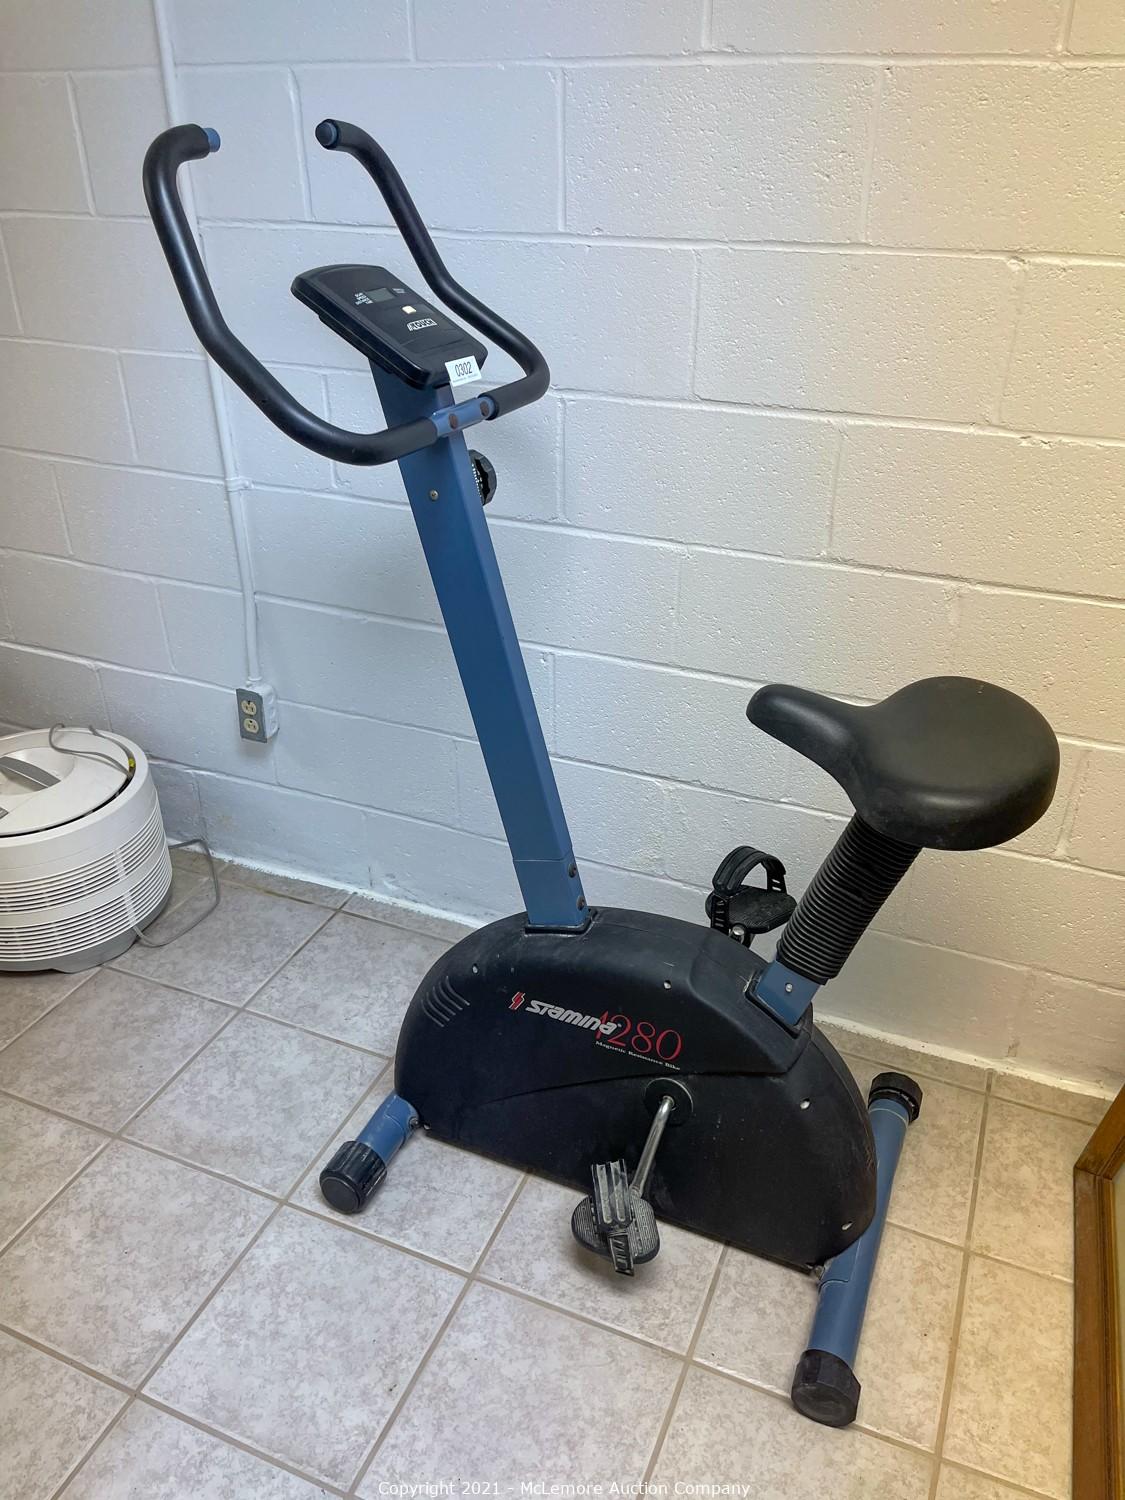 McLemore Company - Auction: Furniture, Tools, Electronics, Memorabilia, Home Decor, Exercise Equipment, 10 Trailer, Smoker Trailer and More from a Home in Winchester, TN ITEM: Stamina 1280 Magnetic Resistance Bike